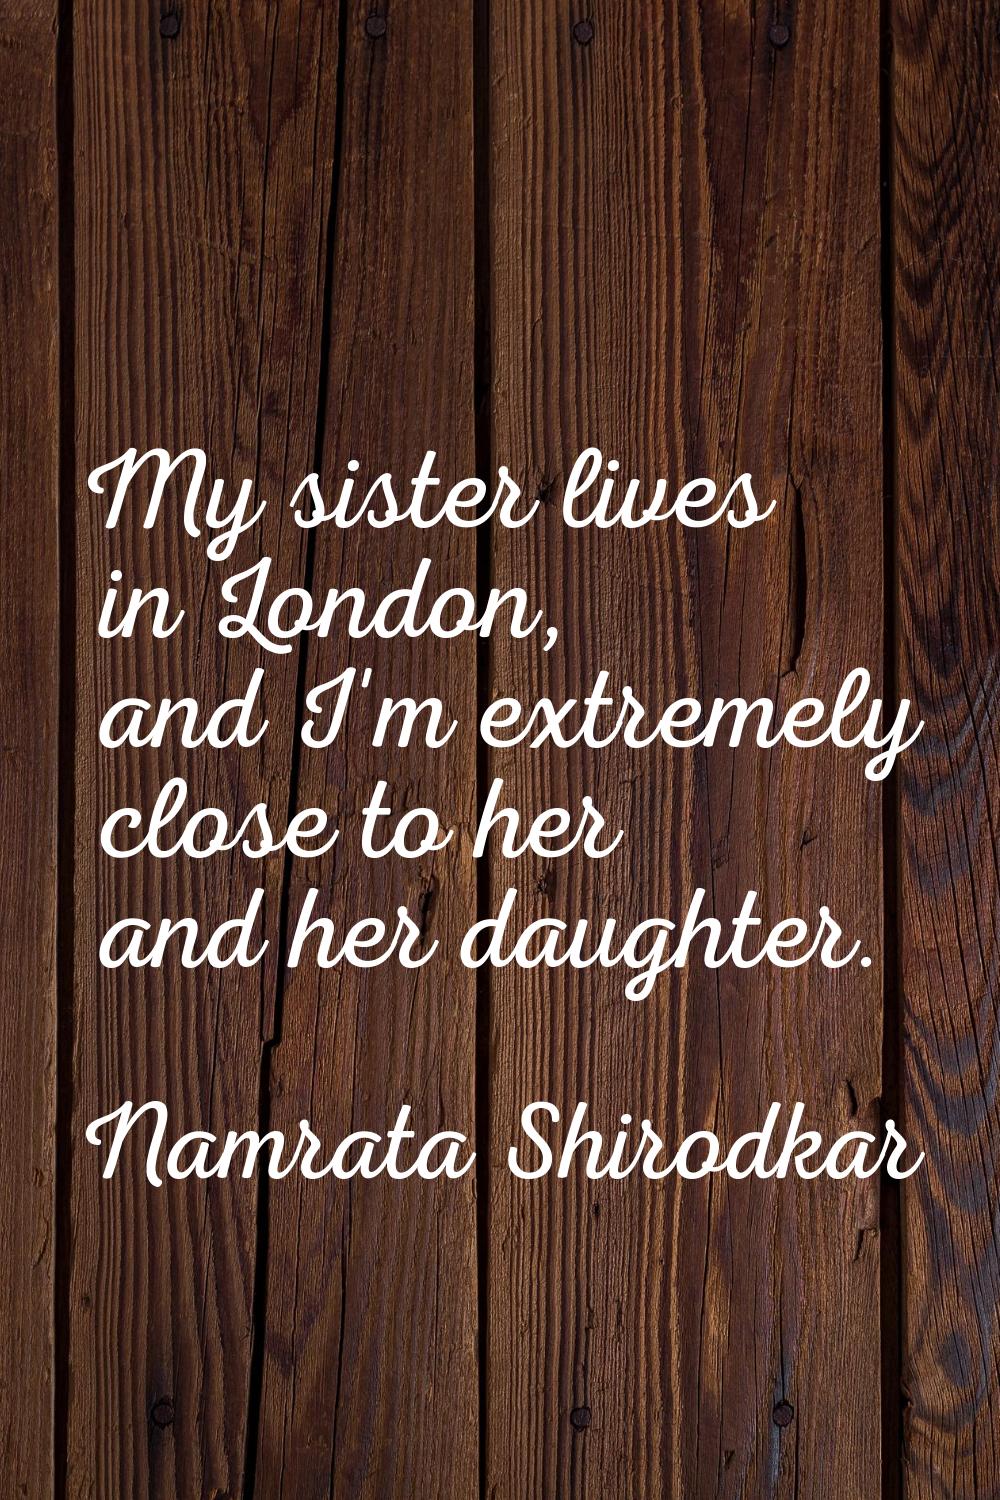 My sister lives in London, and I'm extremely close to her and her daughter.